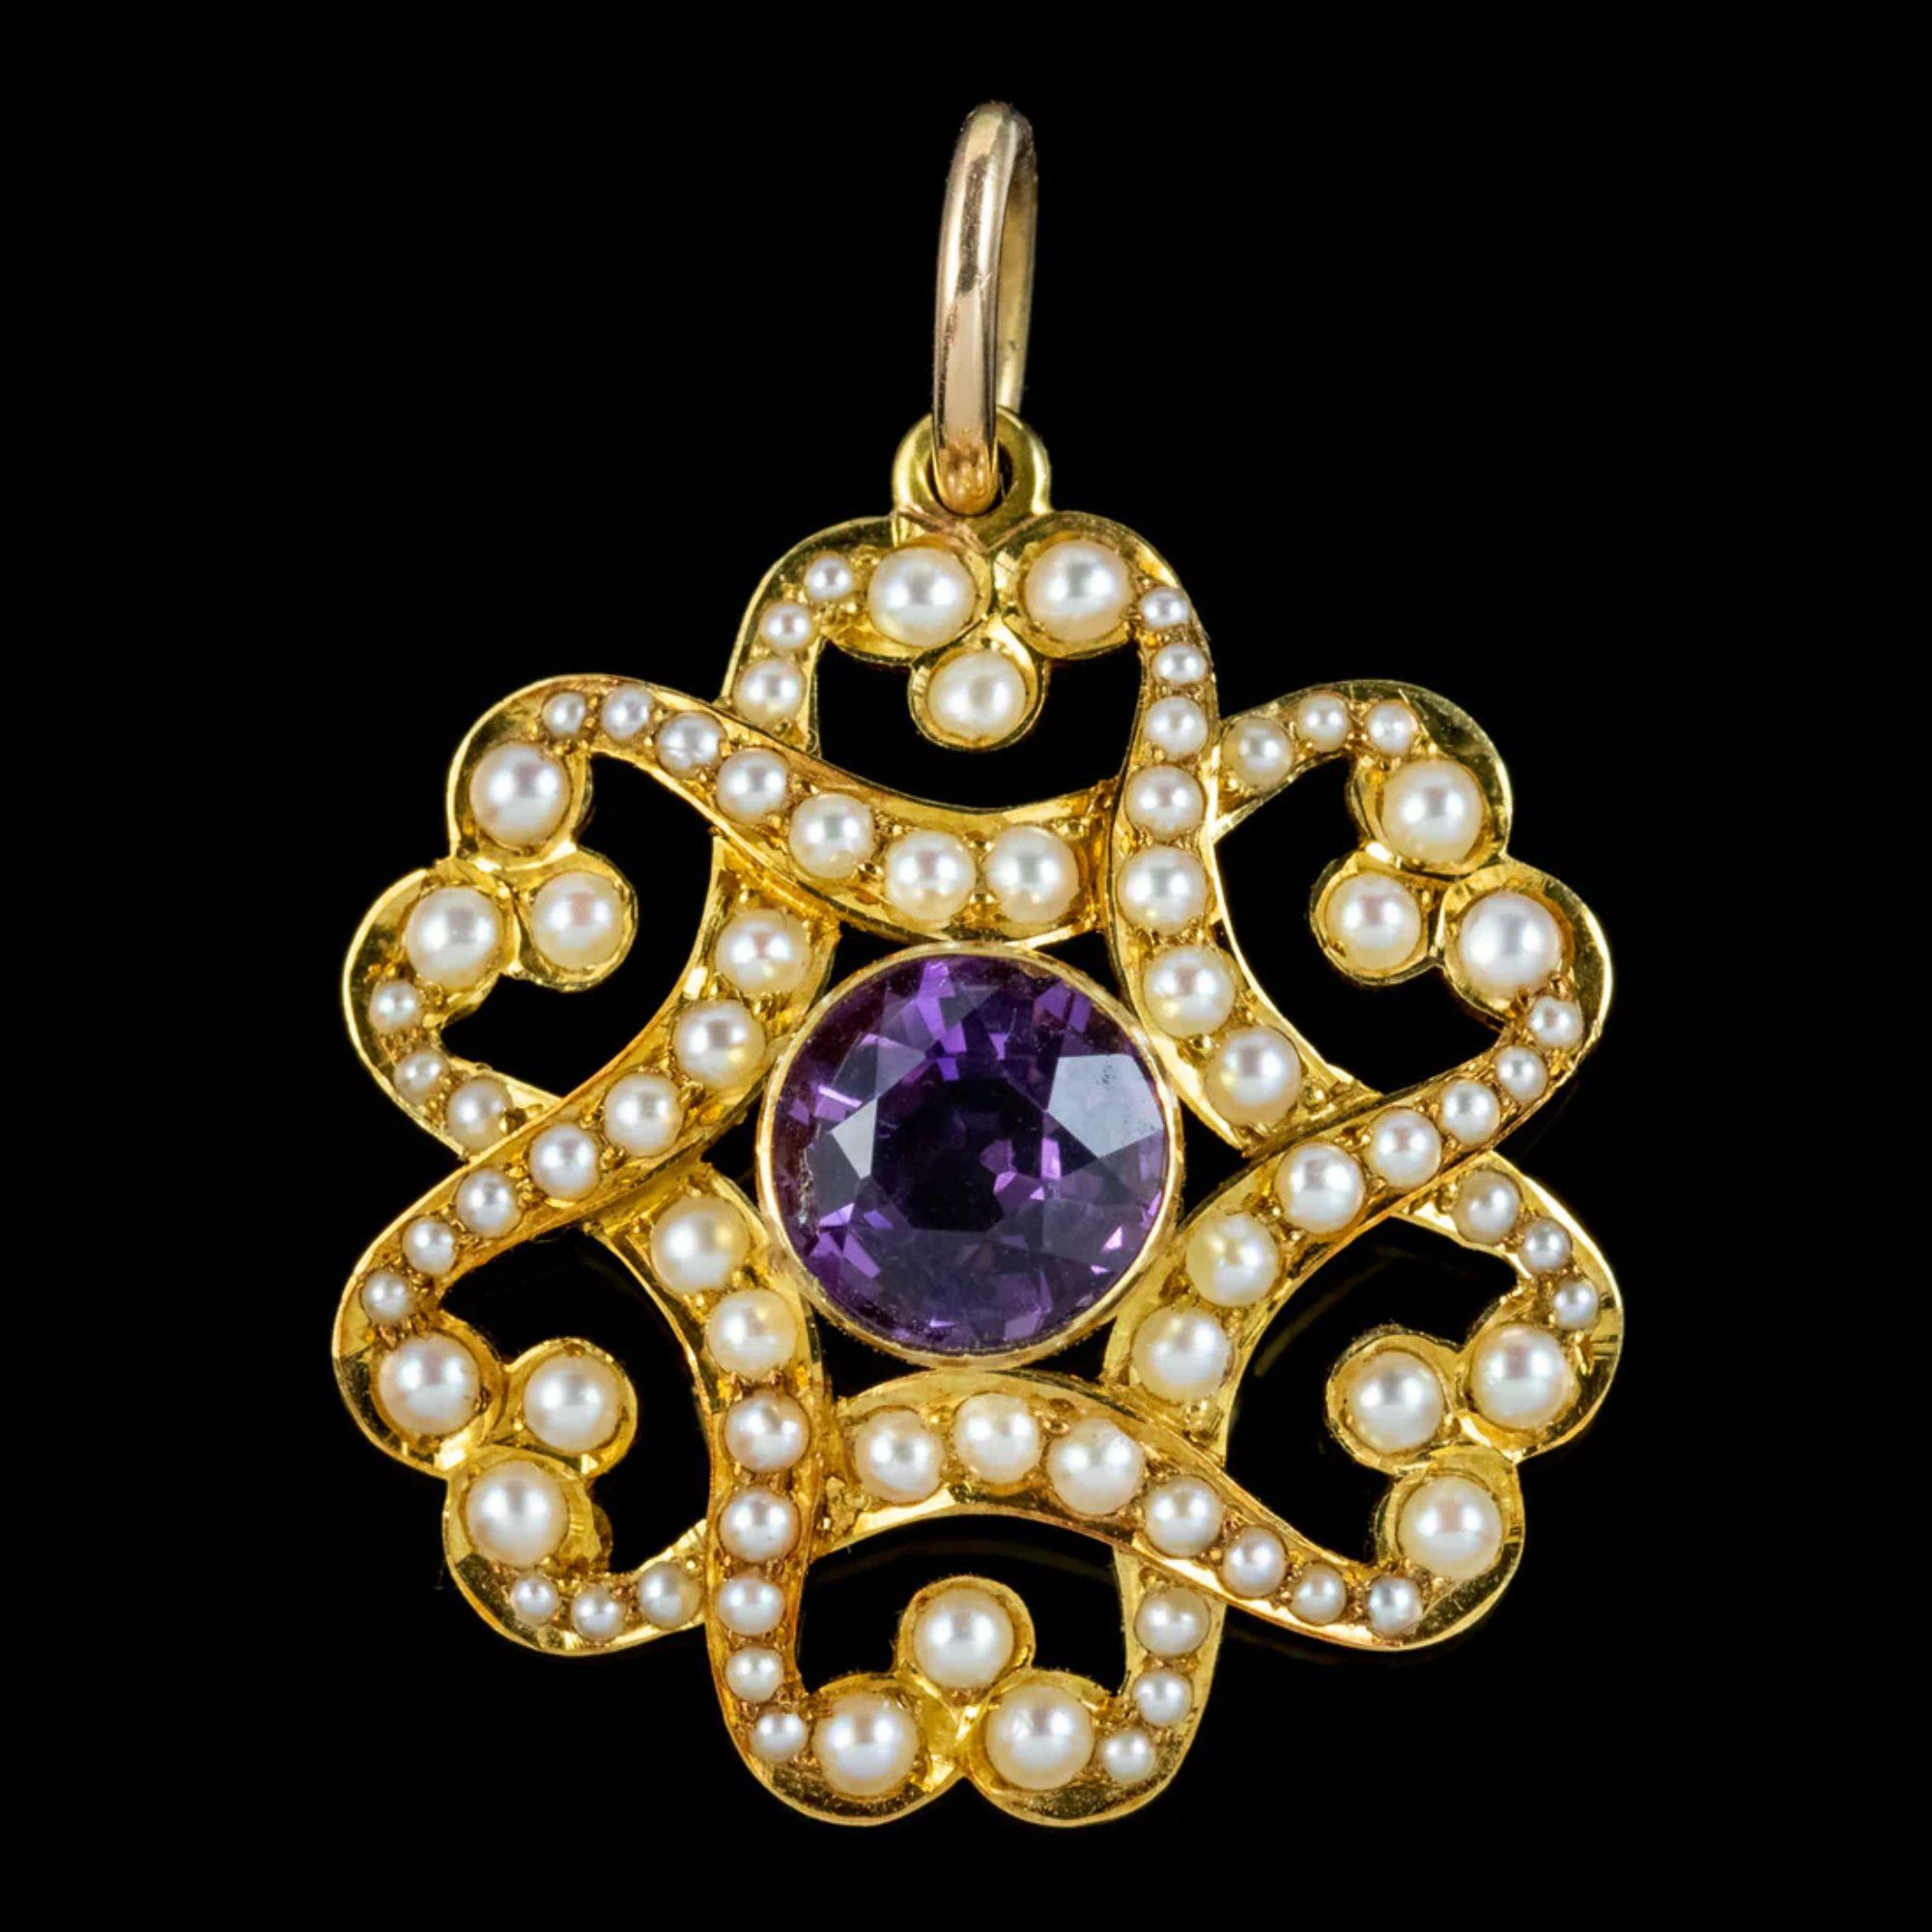 A pretty antique Victorian pendant made by London jewellers “Gresham Barber & Co” in the early 20th century. The piece is fashioned in 15ct gold with a fabulous overlapping design decorated with pearls and a bezel set amethyst in the centre weighing